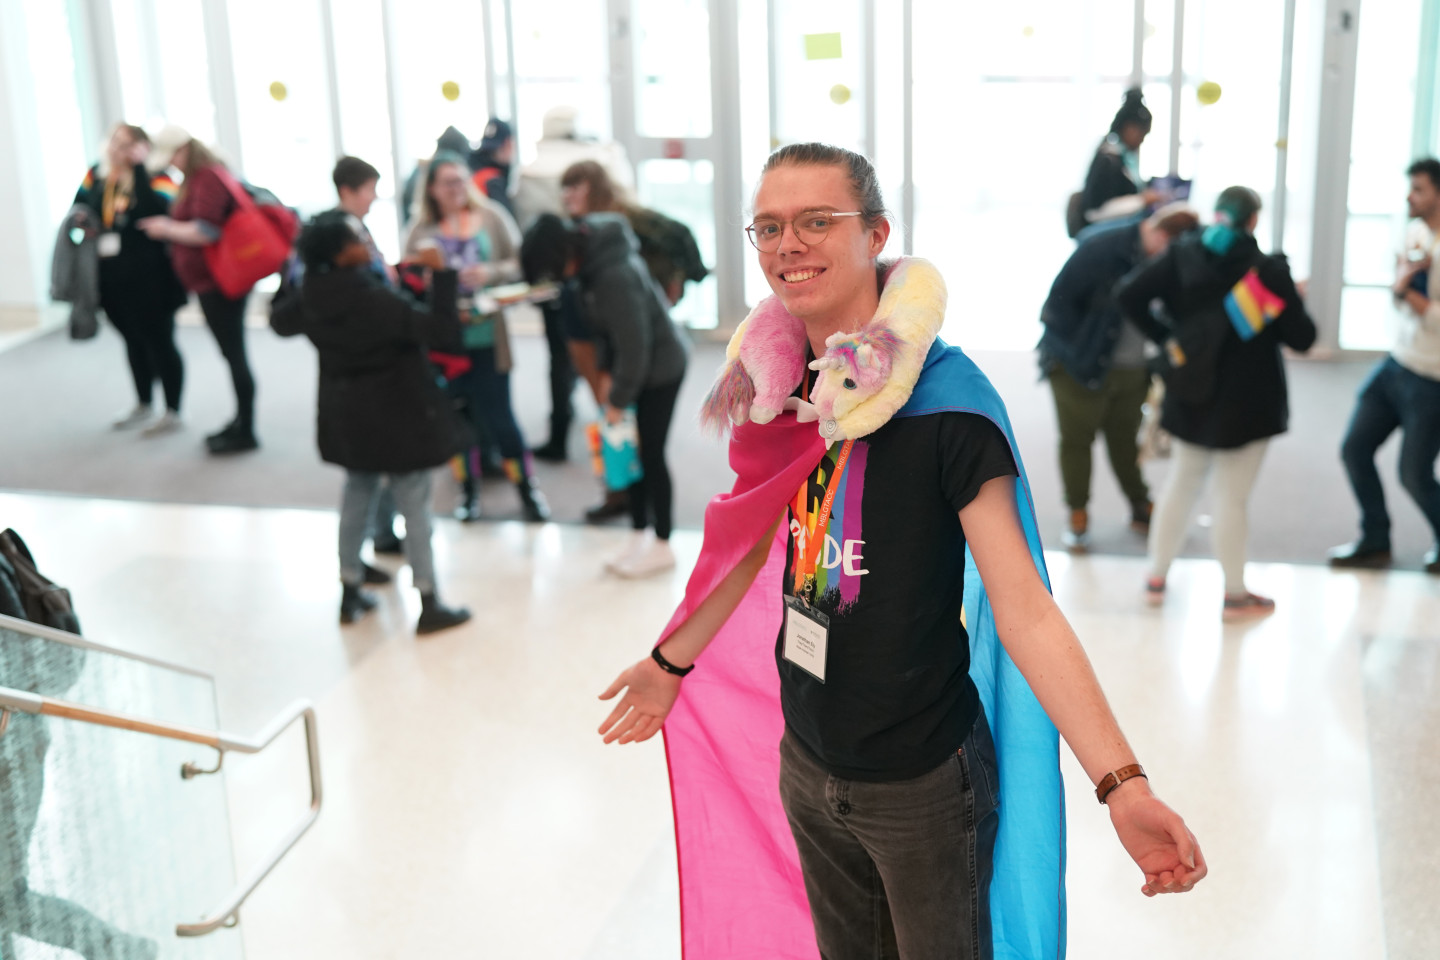 A student standing on stairs wearing the pansexual pride flag as a cape.